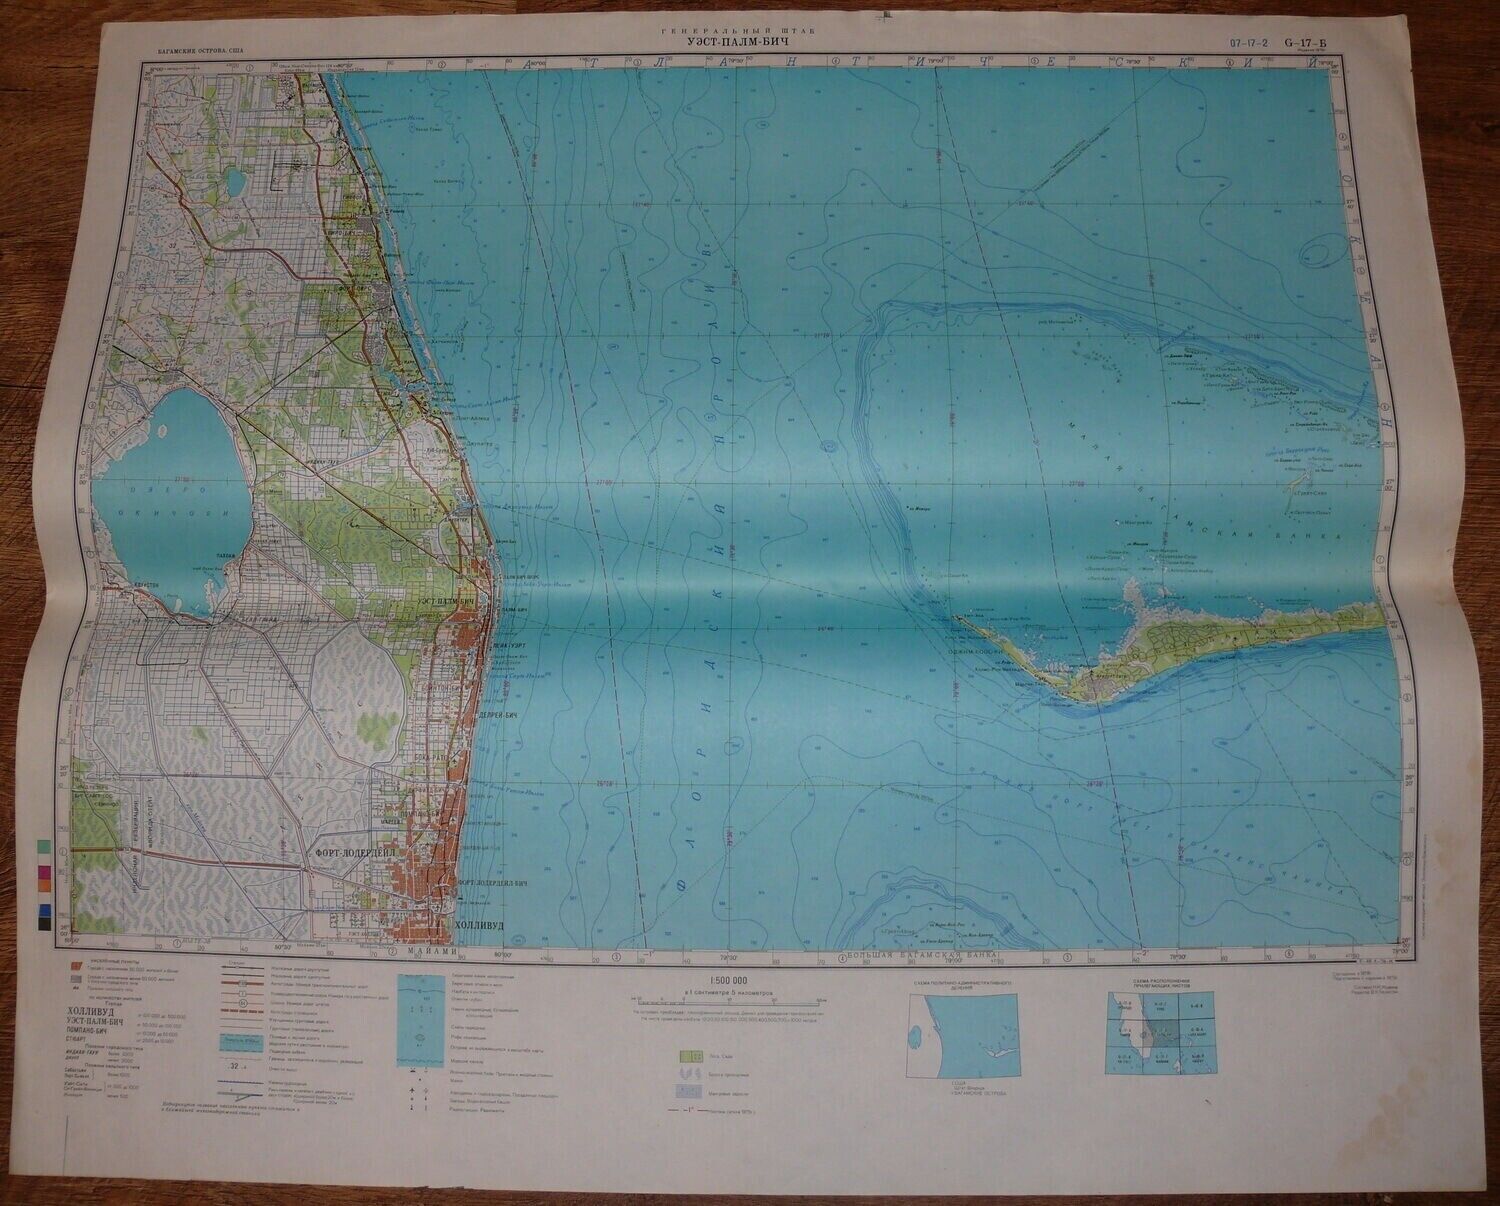 Authentic Soviet Army Military Topographic Map West Palm Beach, Florida, USA